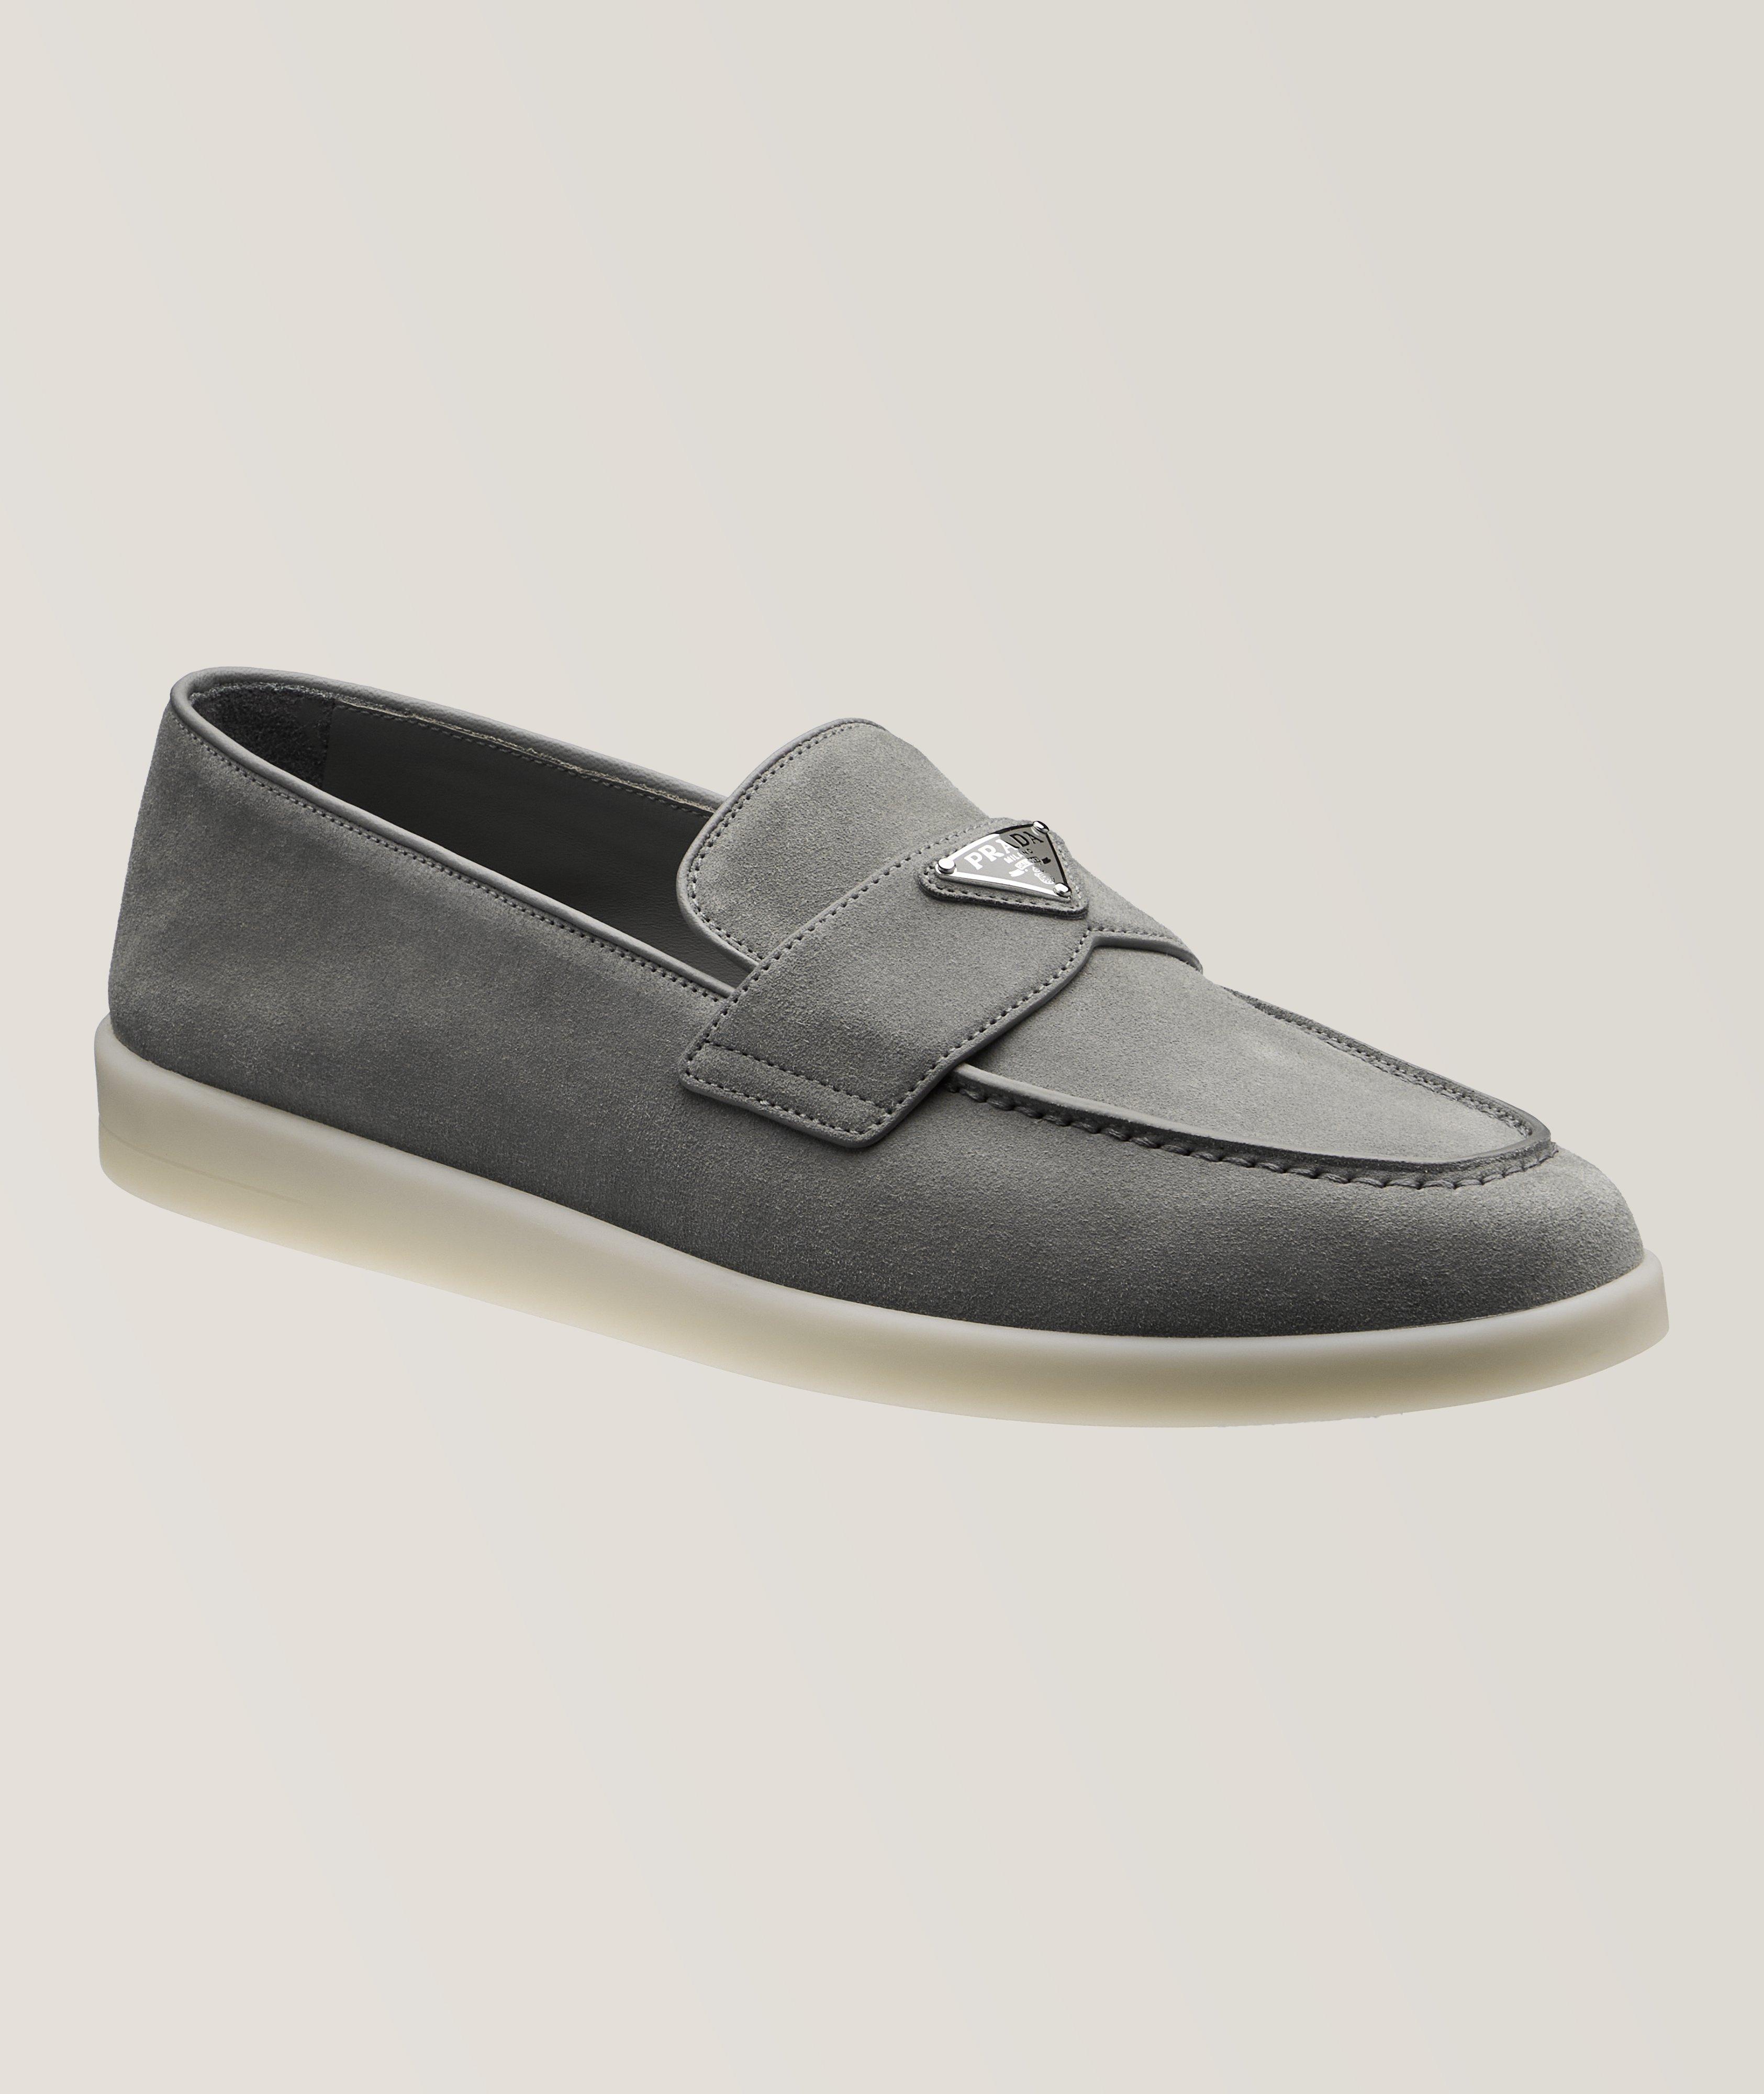 Traingolo Band Suede Loafers image 0